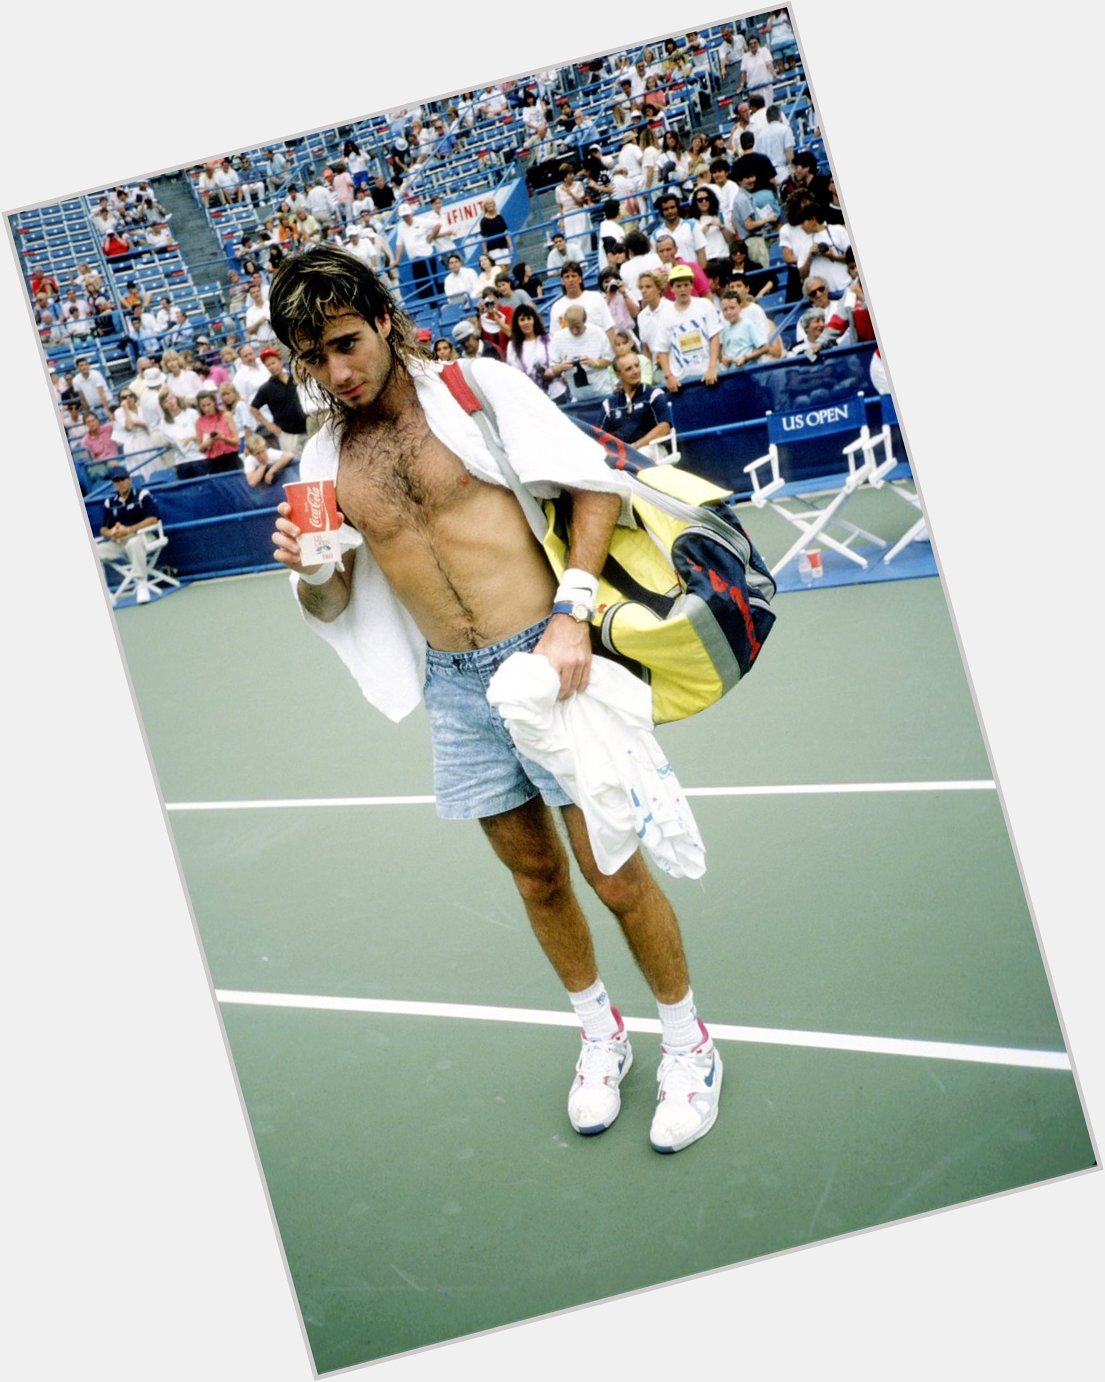 Happy Birthday to the one and only Andre Agassi  True tennis icon & trailblazer for denim shorts a.k.a. jorts. 